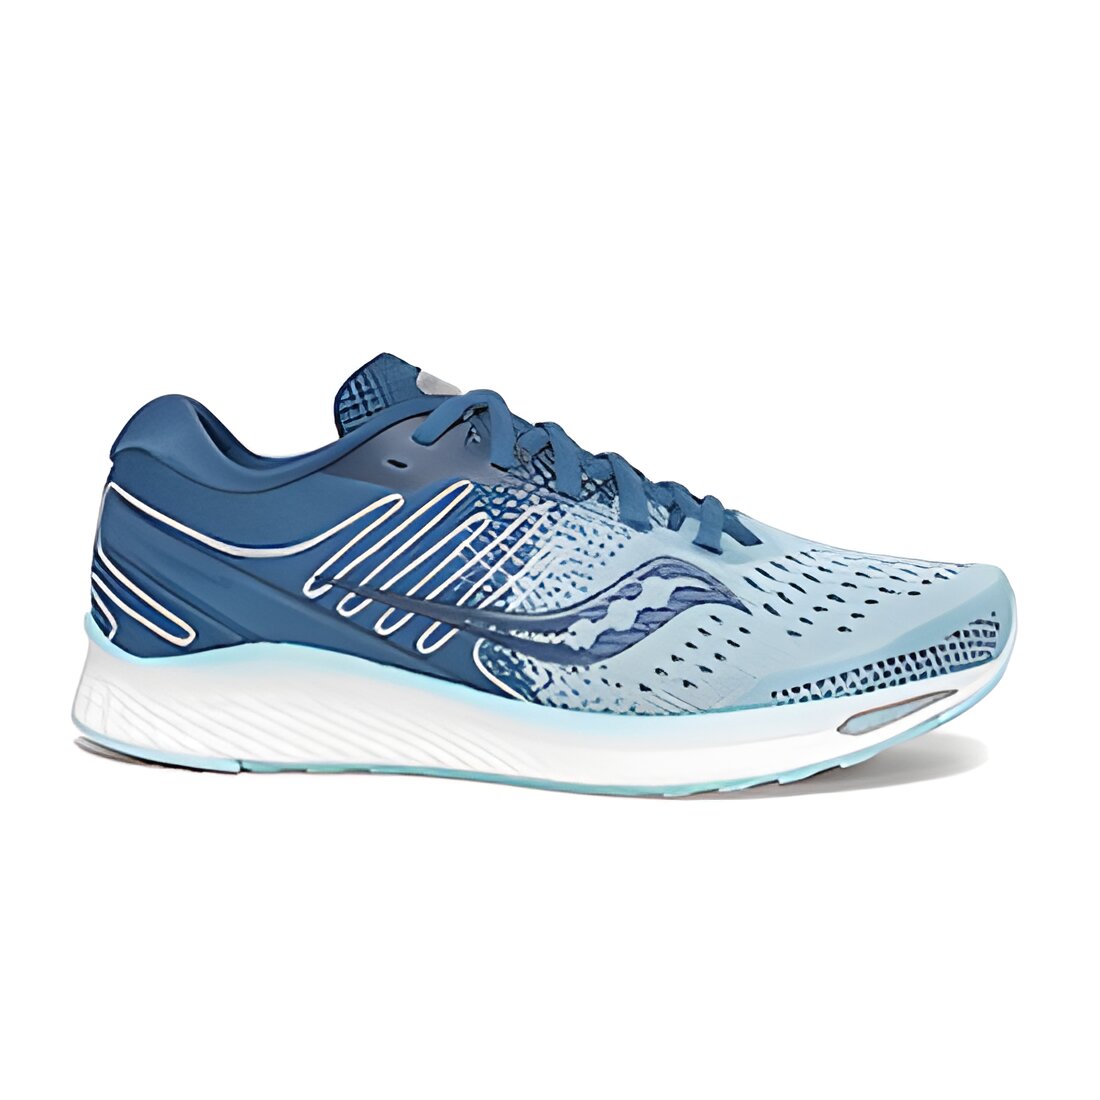 Free Saucony Brand Sneakers For Product Testers